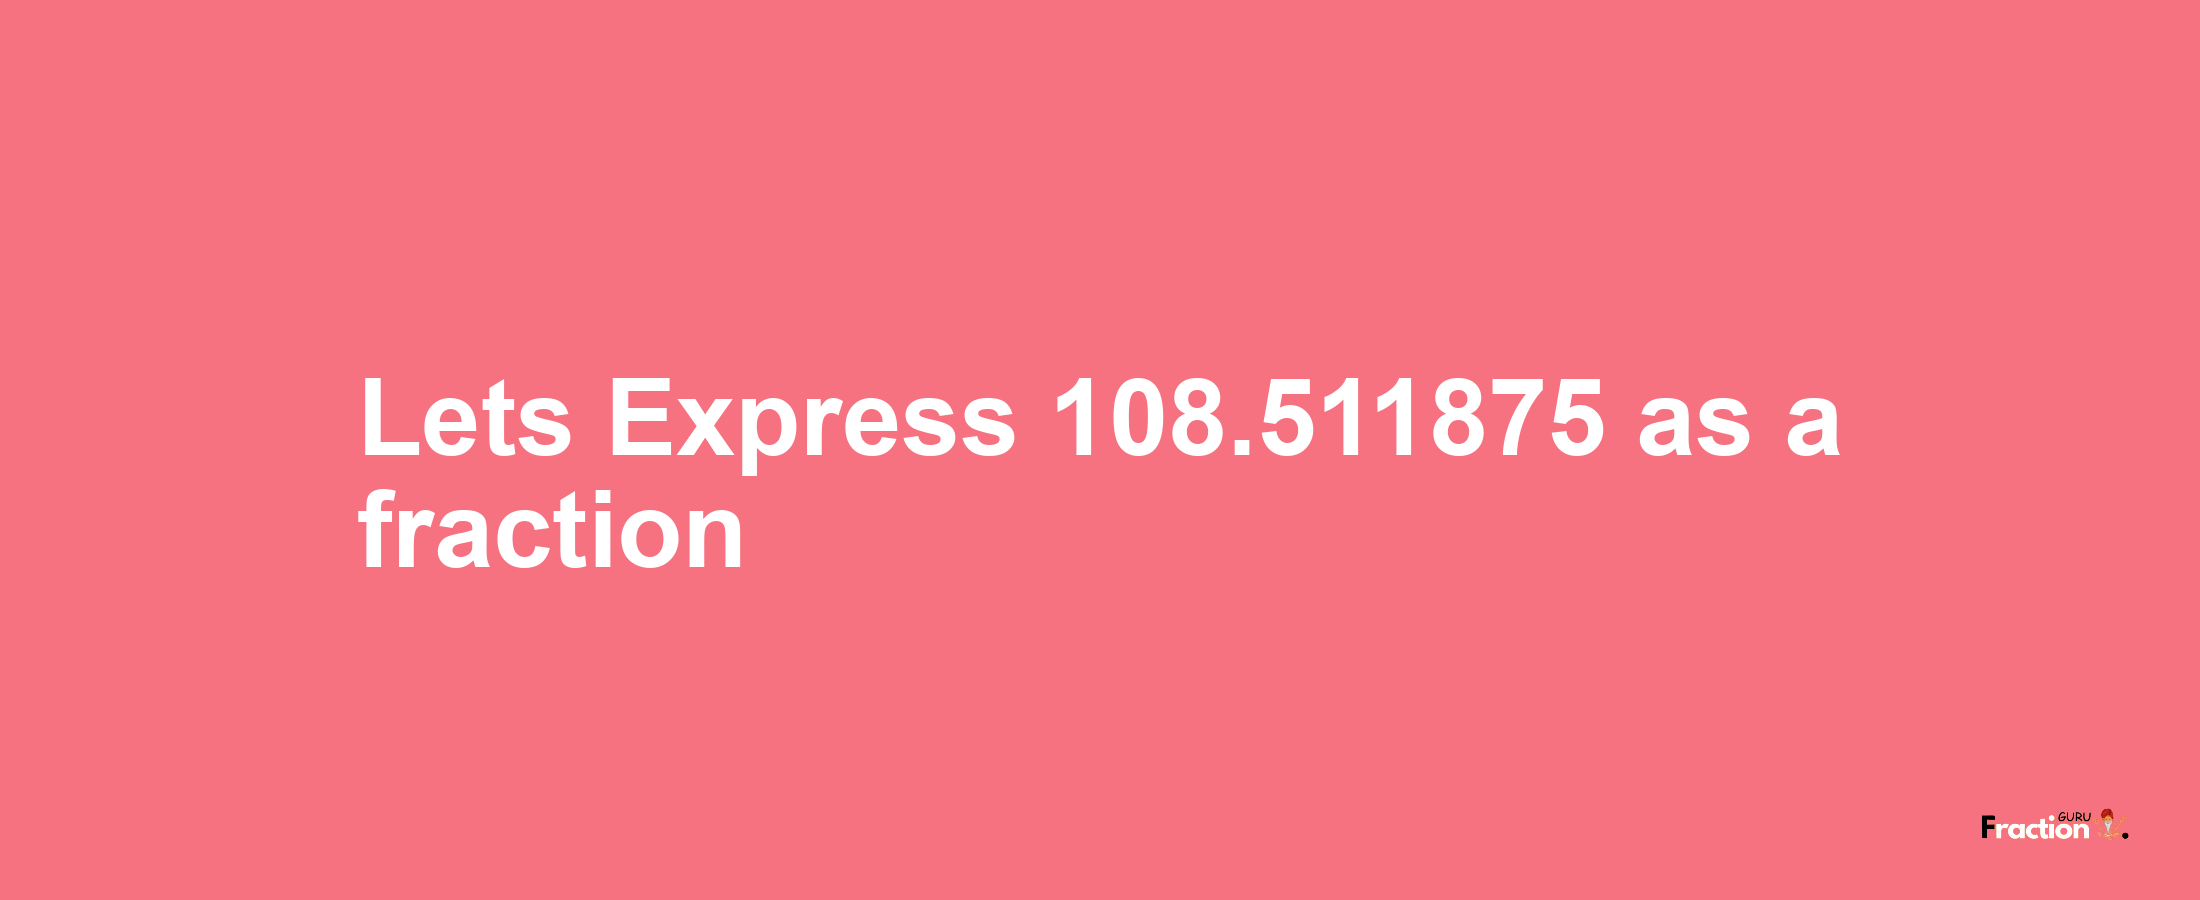 Lets Express 108.511875 as afraction